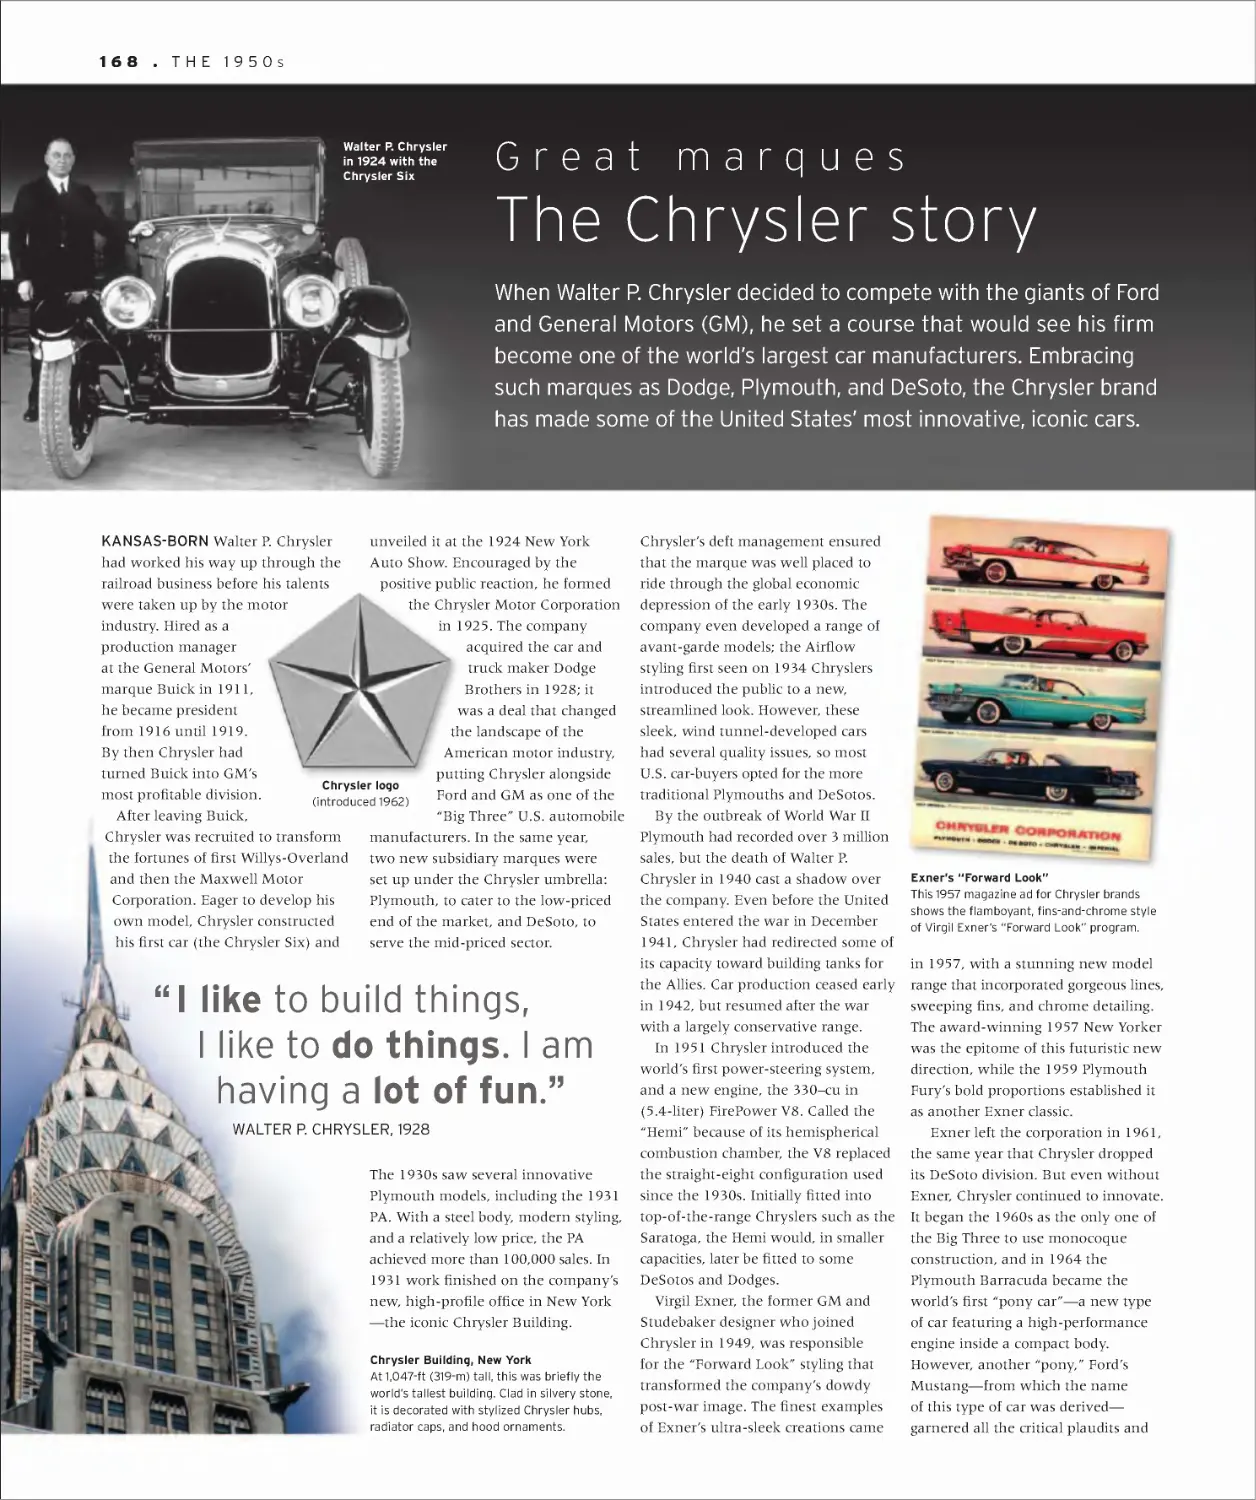 Great marques: The Chrysler story 168